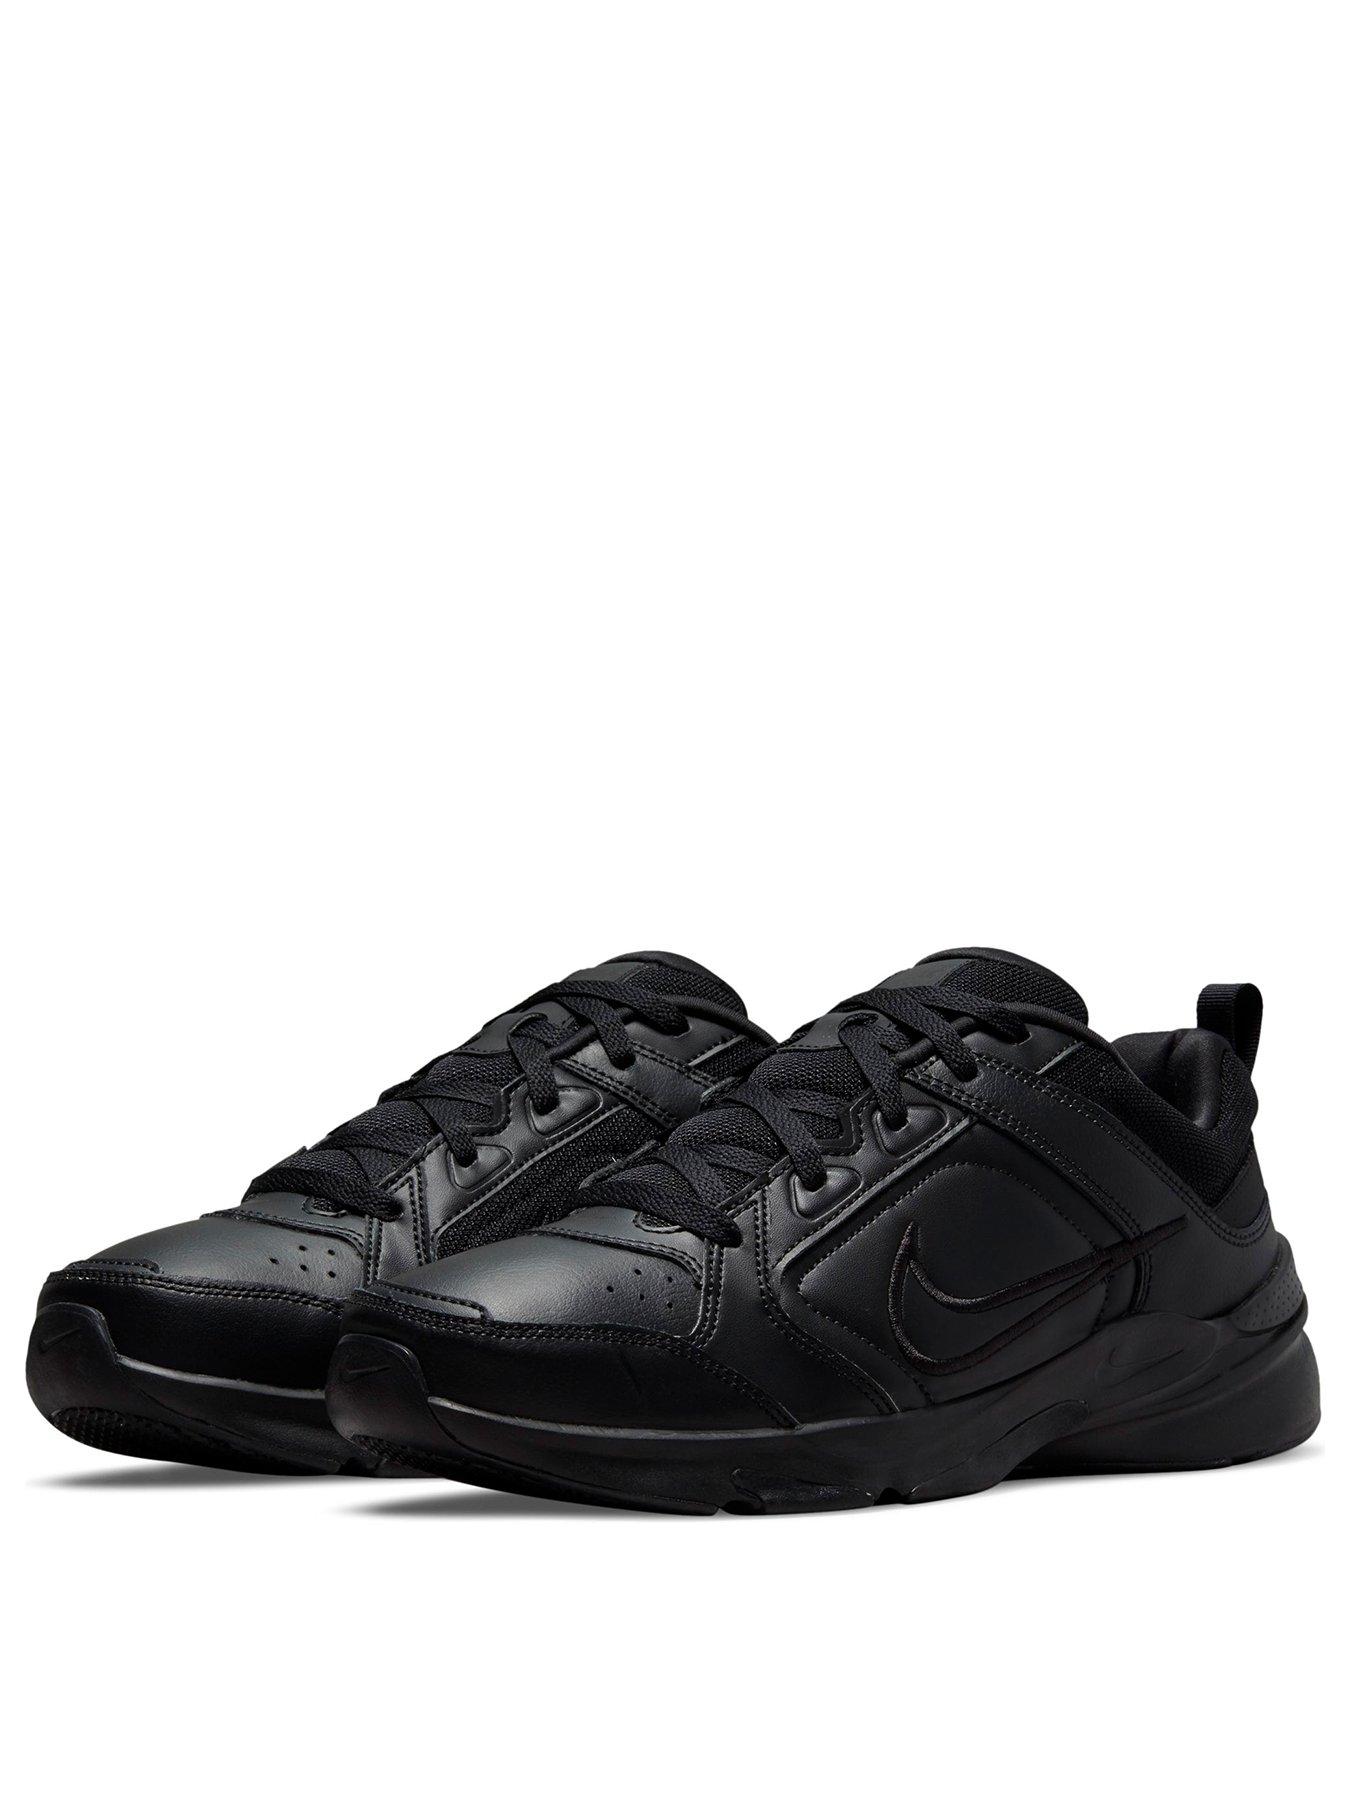 Trainers Defy All Day - Black